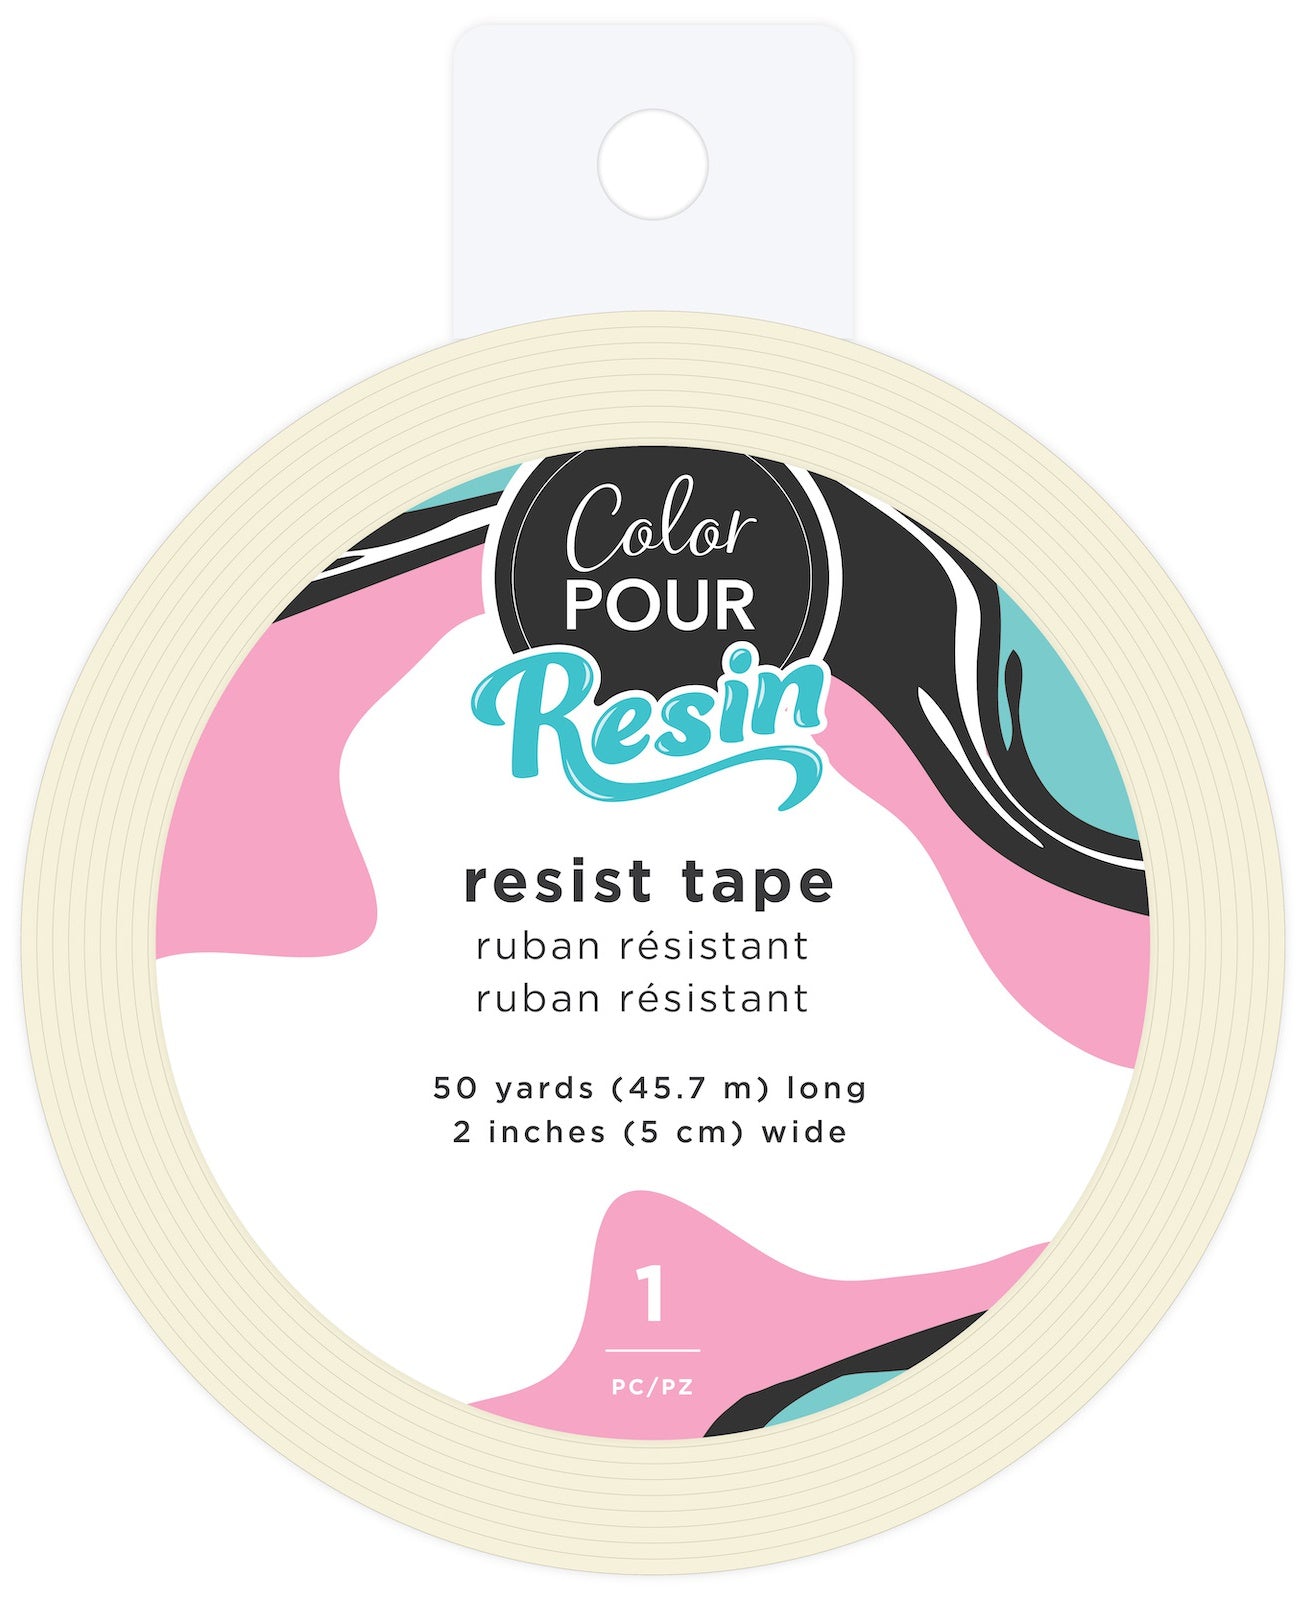 American Crafts Color Pour Resin Resist Tape 50yd